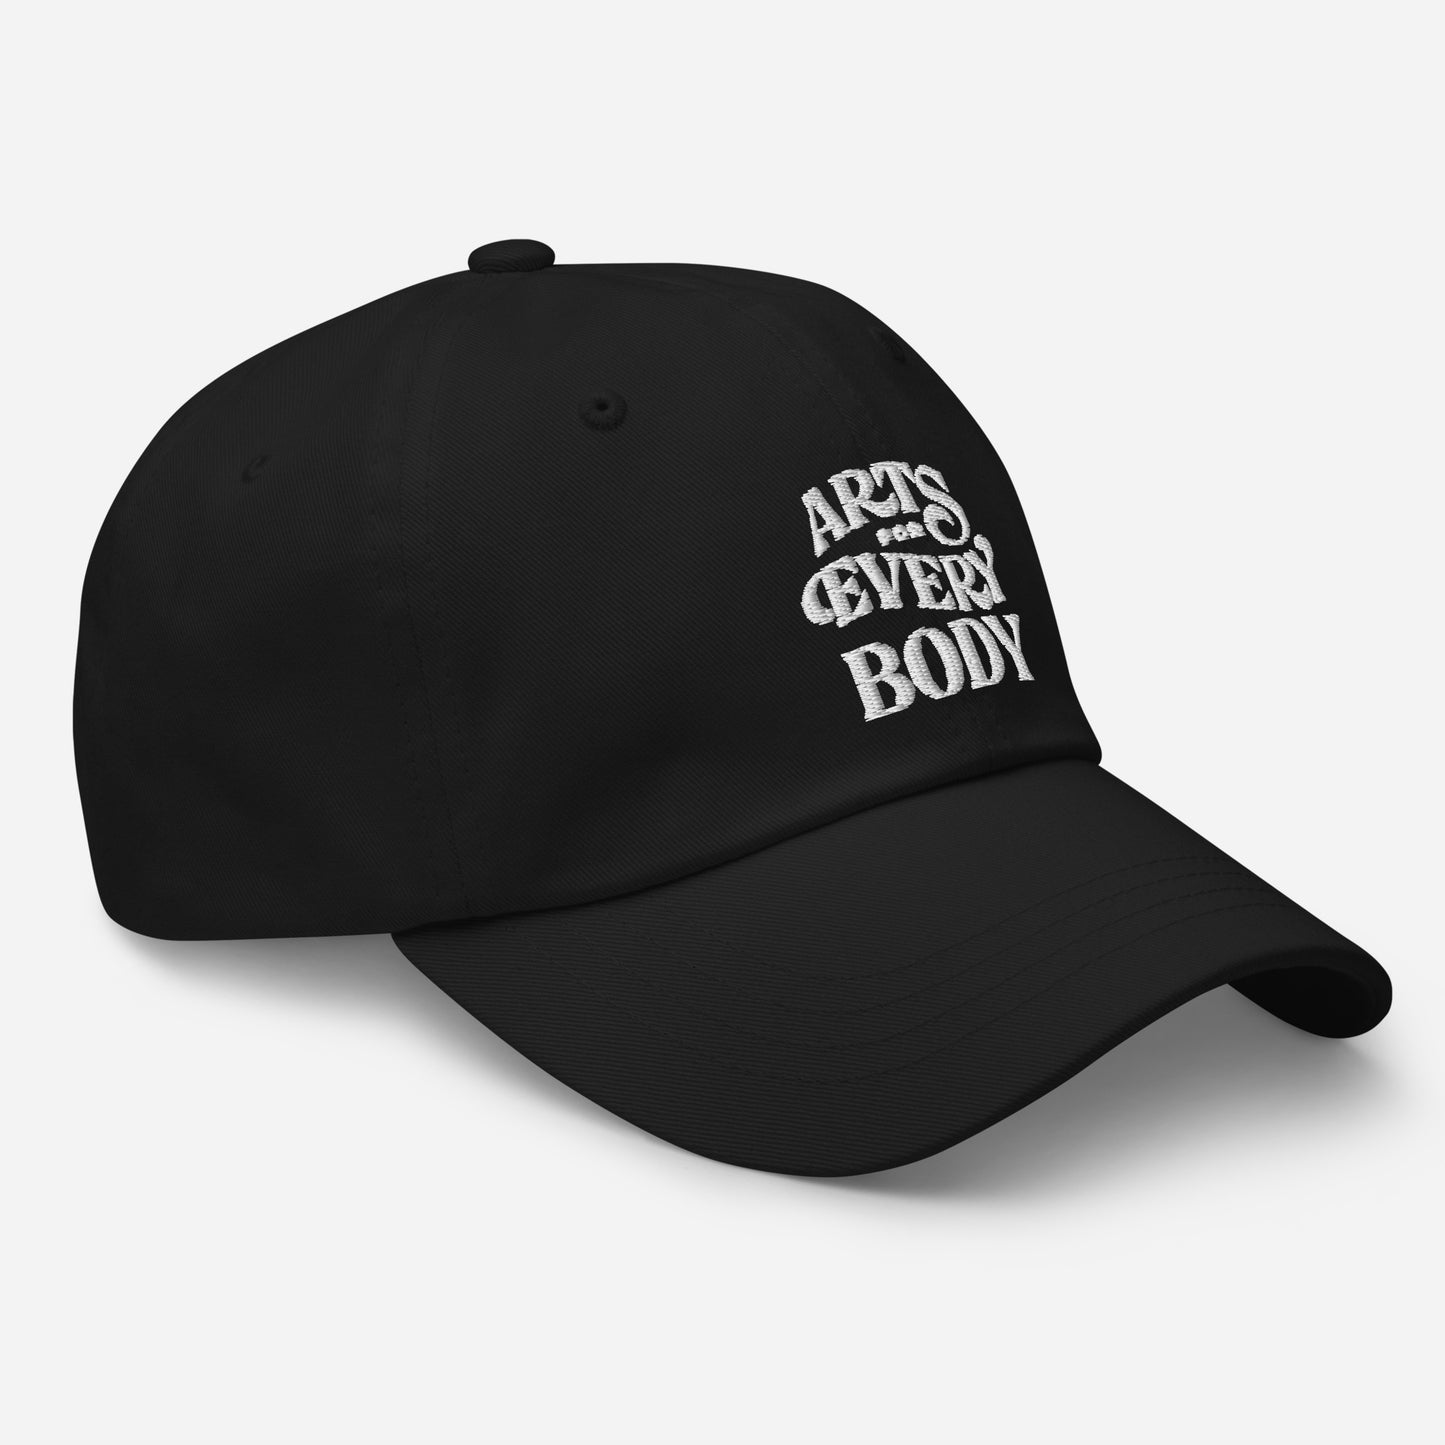 Arts for Everybody Hat